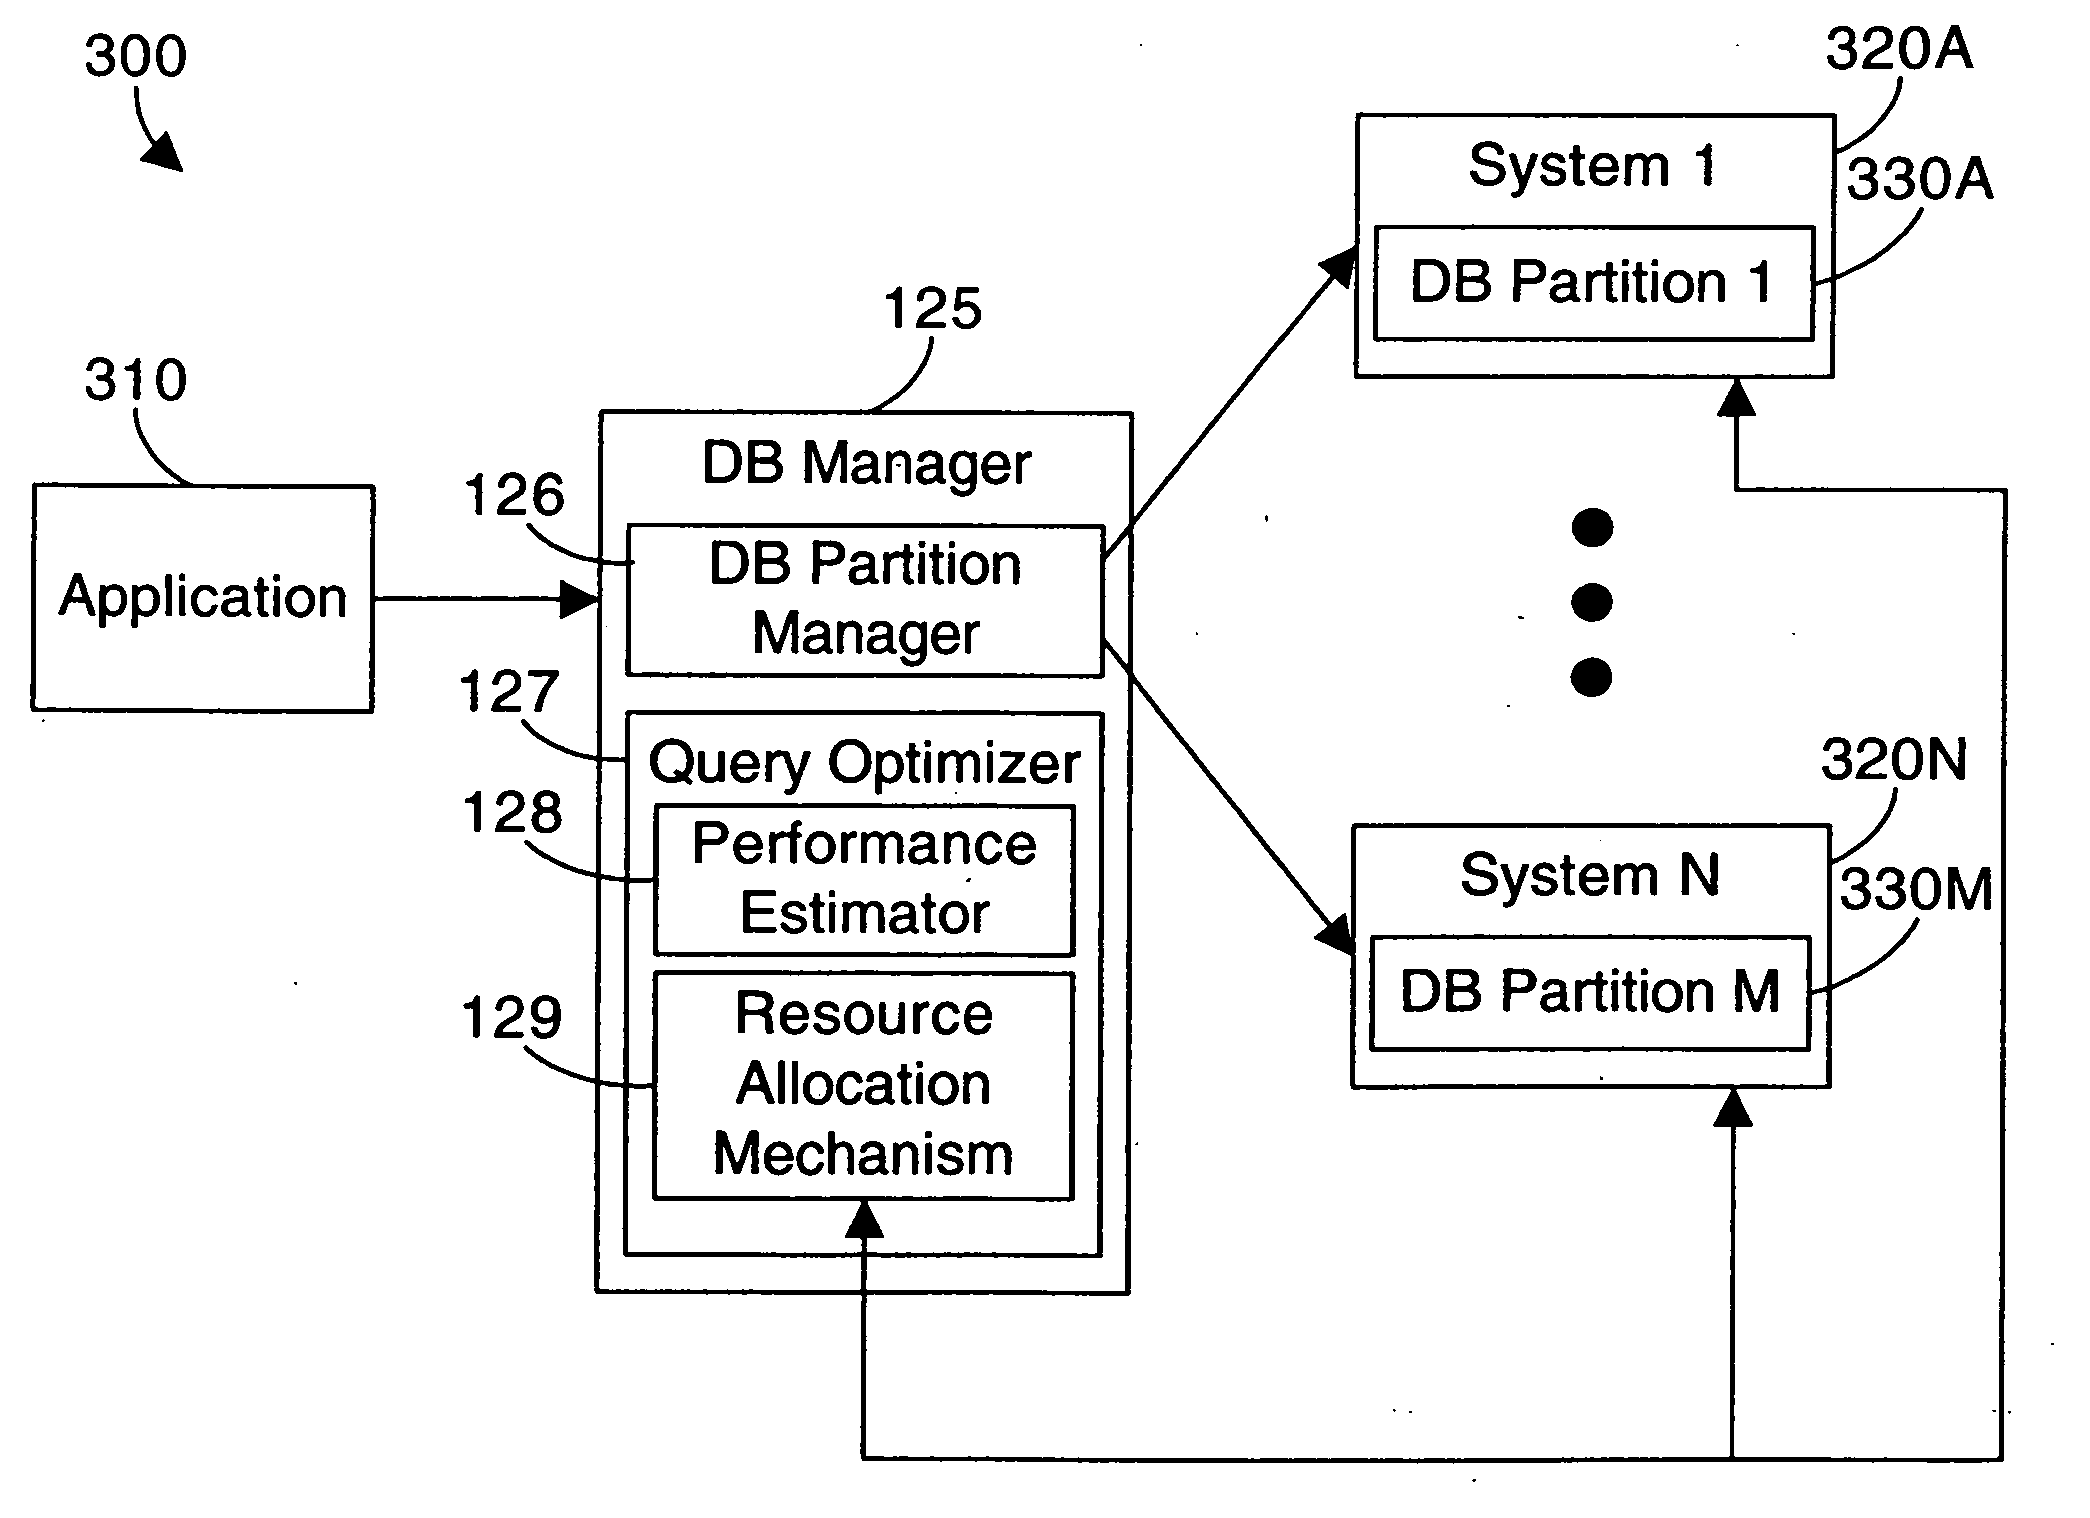 Apparatus and method for autonomic adjustment of resources in a logical partition to improve partitioned query performance